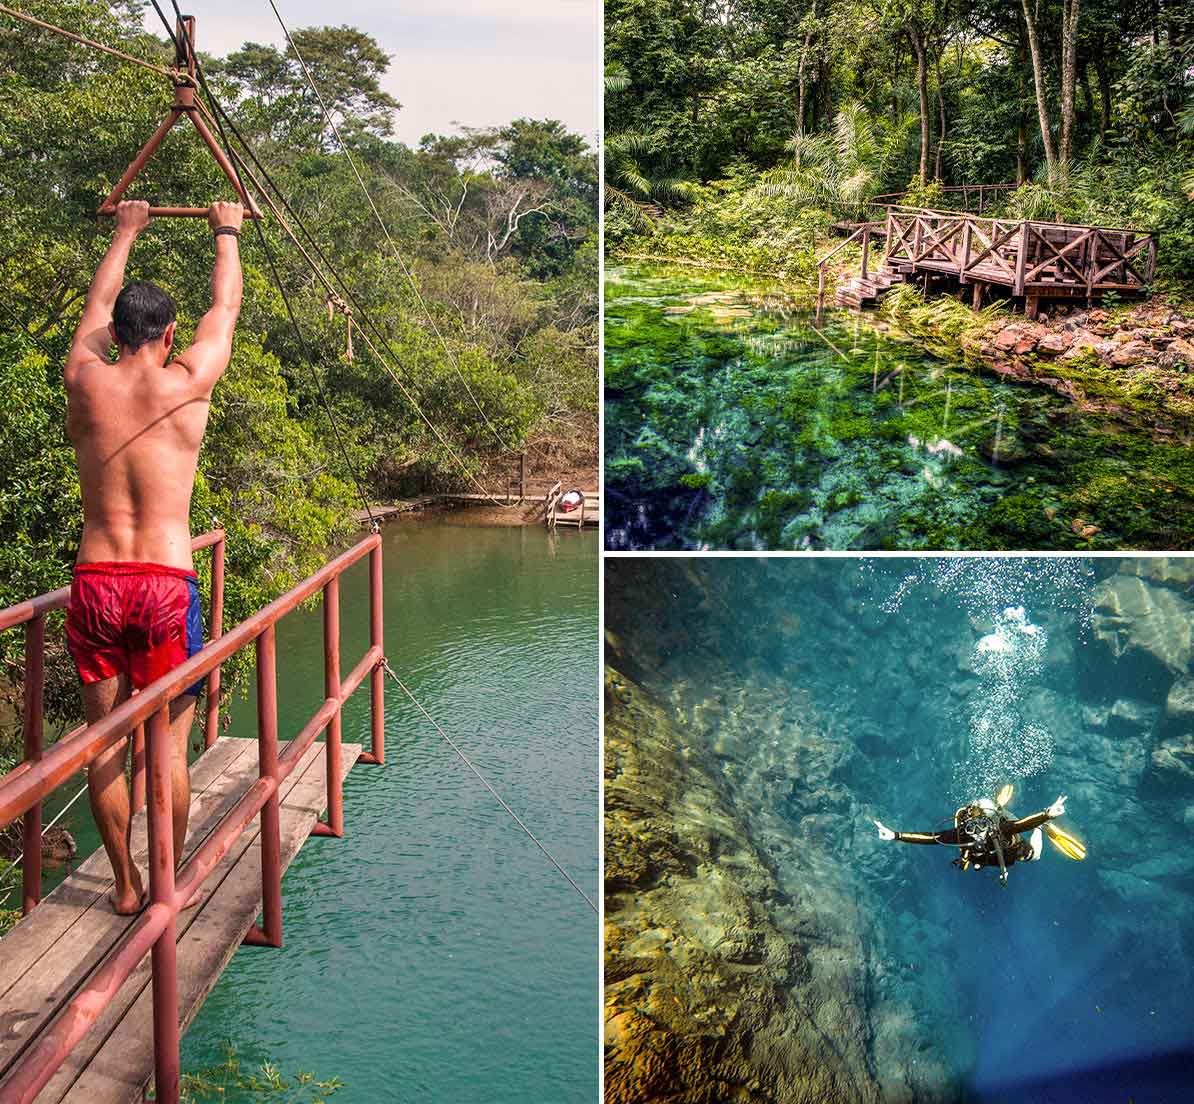 A collage showing a man about to zip-line, a wooden platform next to a pond, and a scuba diver.